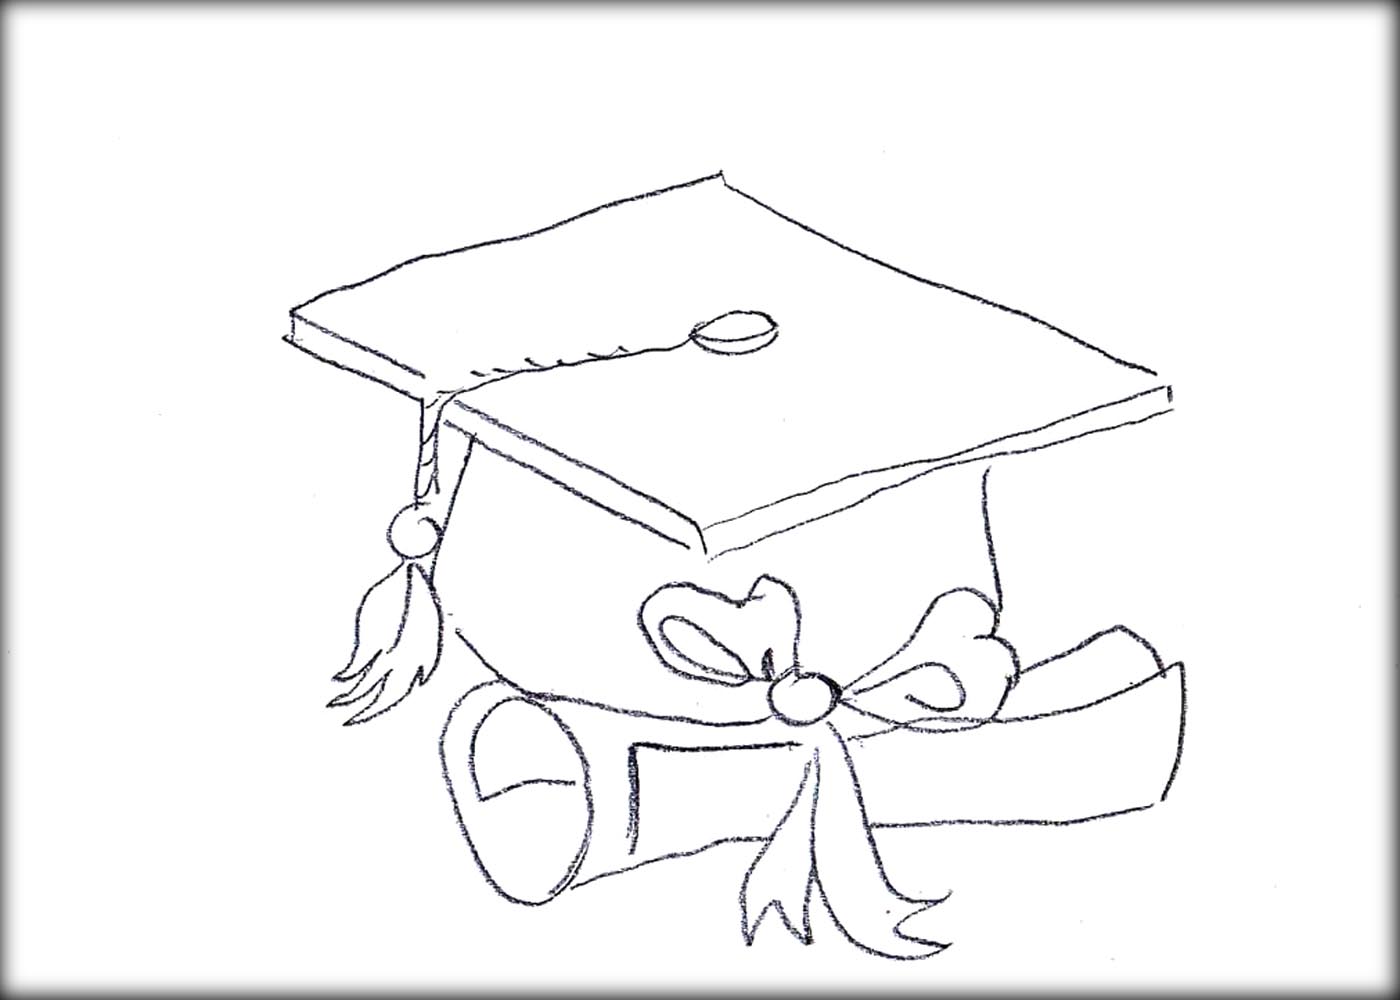 free-coloring-pages-graduation-download-free-coloring-pages-graduation-png-images-free